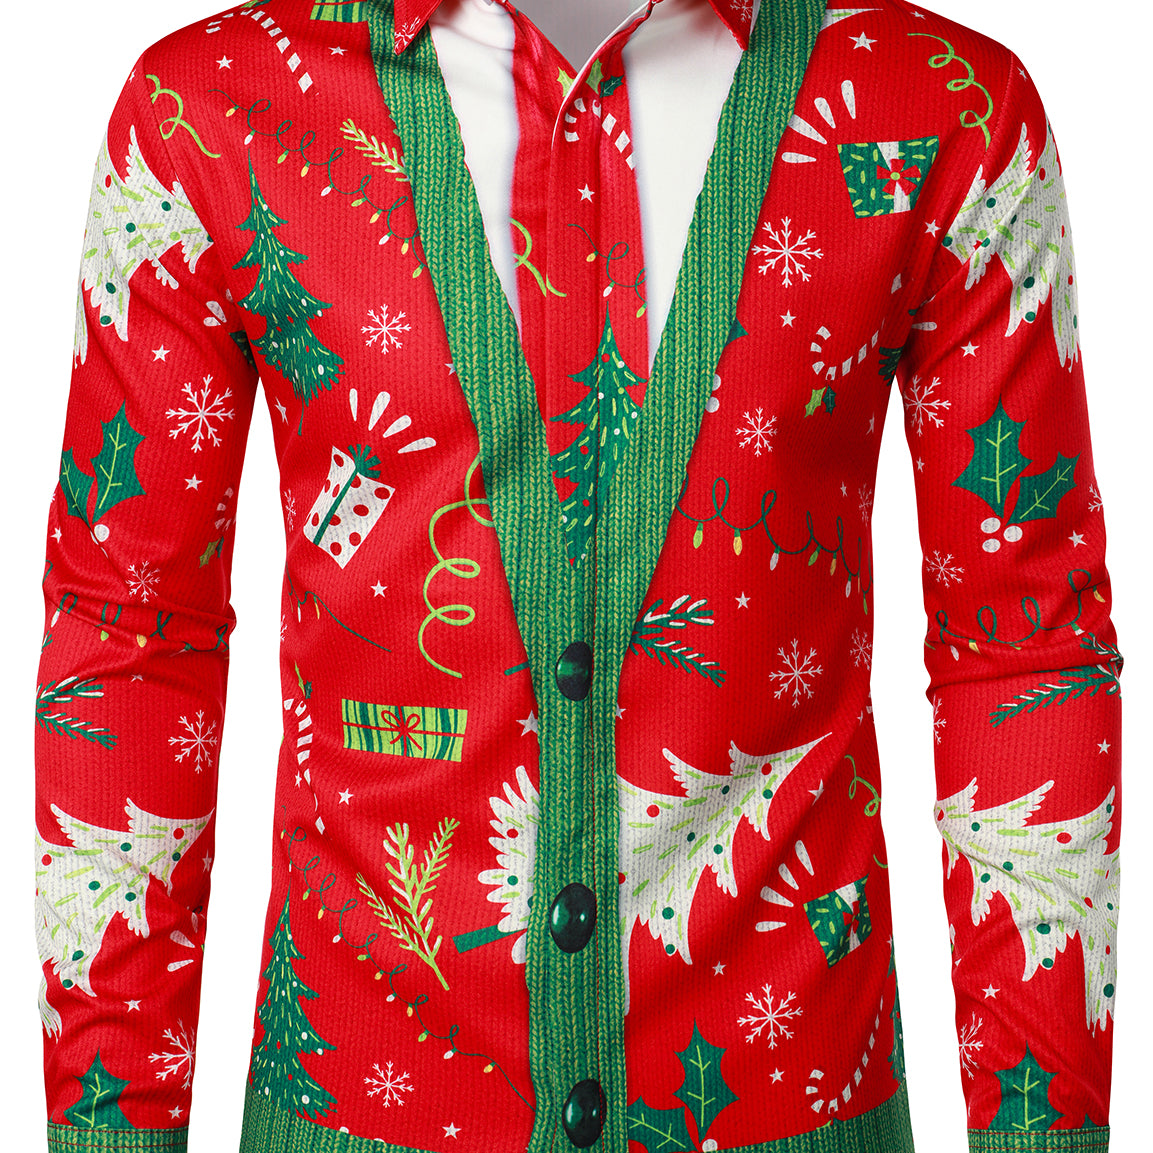 Men's Christmas Tree Print Funny Outfit Themed Top Red Long Sleeve Shirt